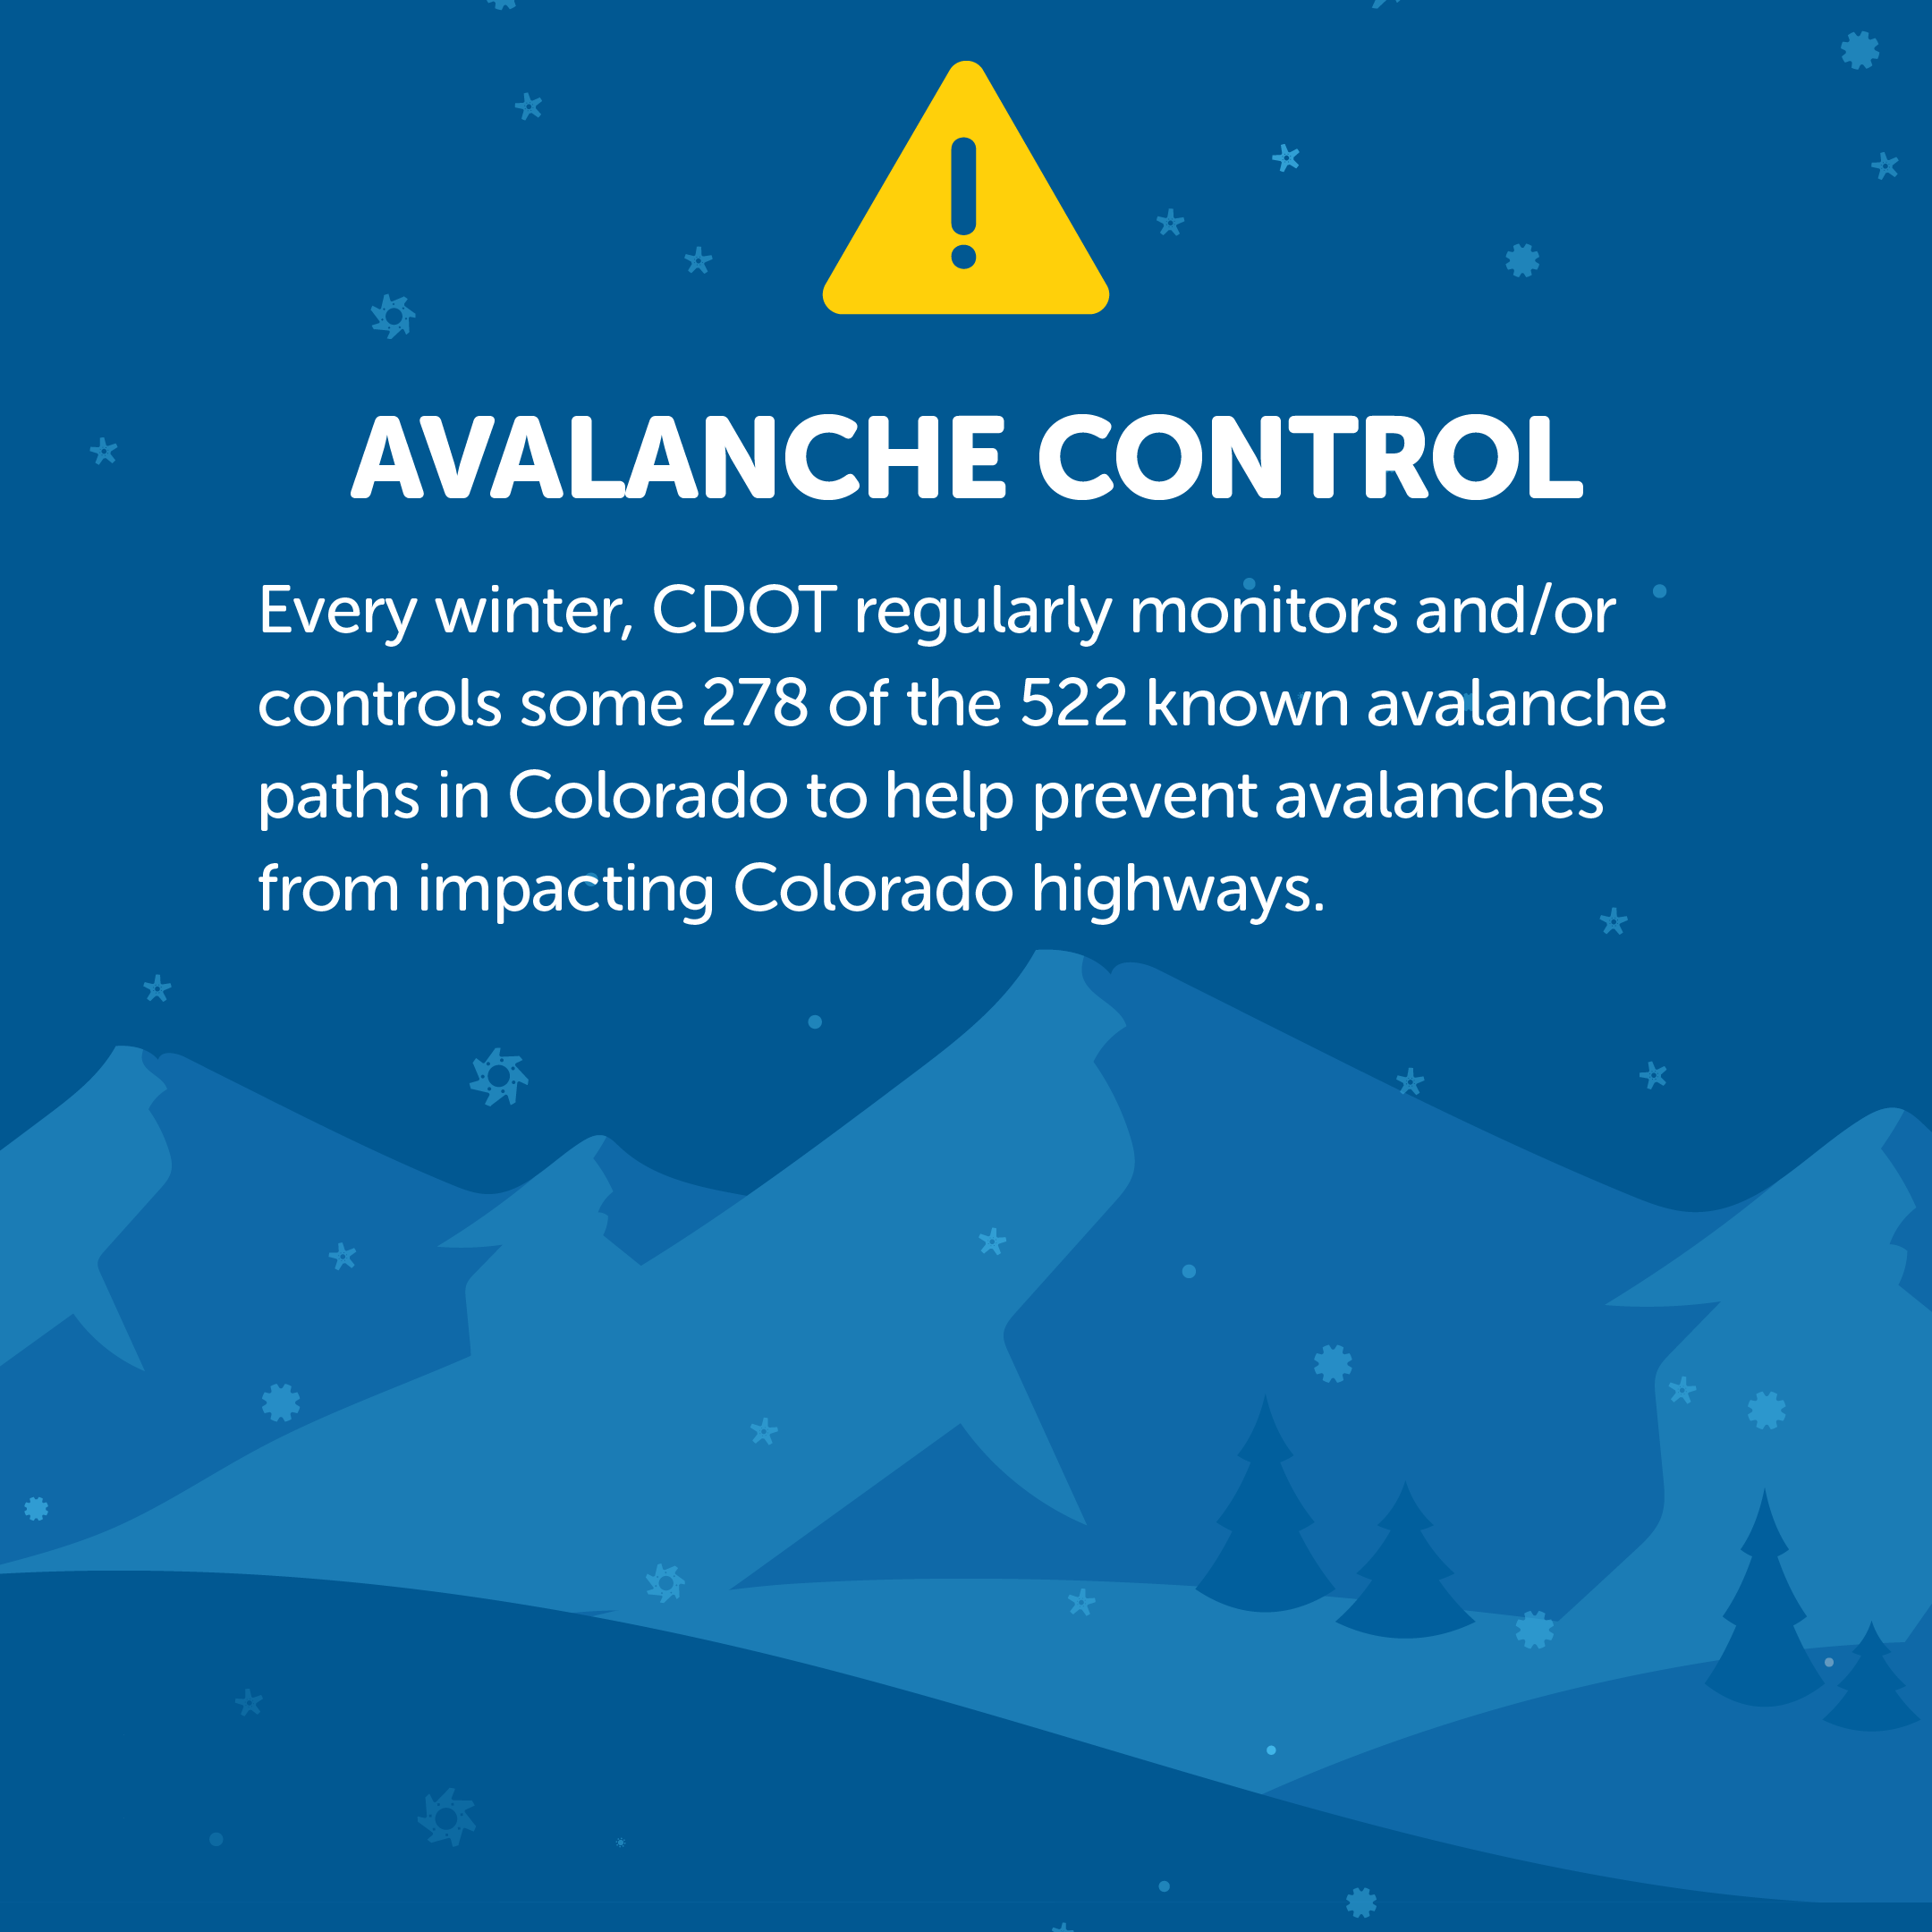 Avalanche Control Page 1 Graphic detail image